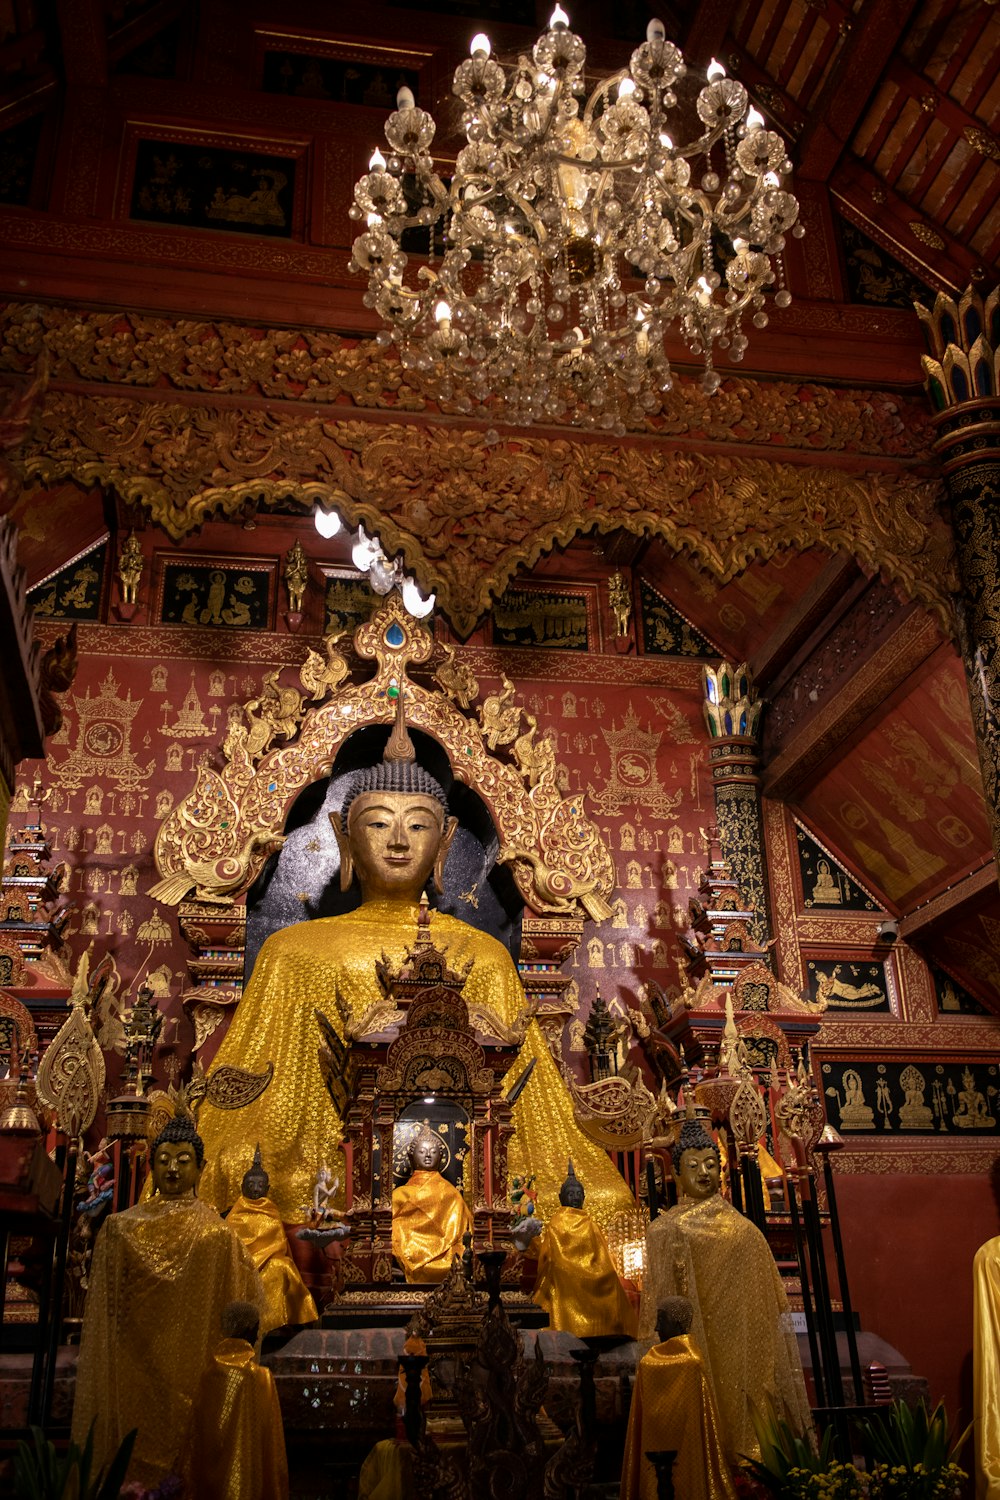 a statue of a buddha in a room with a chandelier